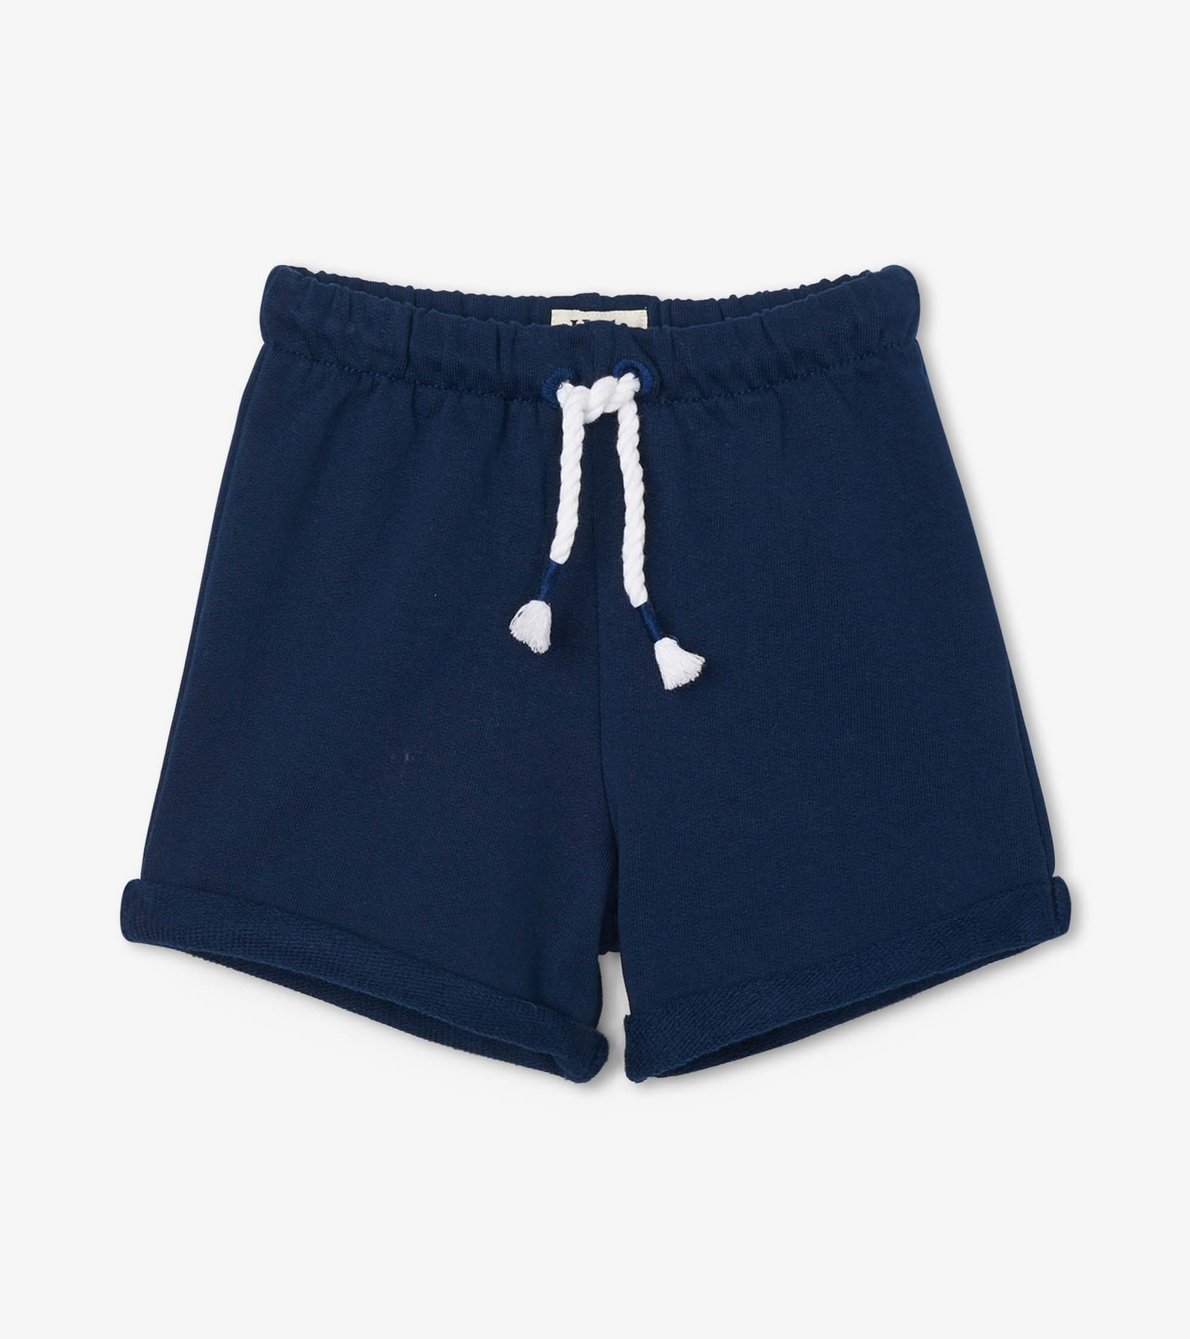 View larger image of Navy French Terry Baby Shorts